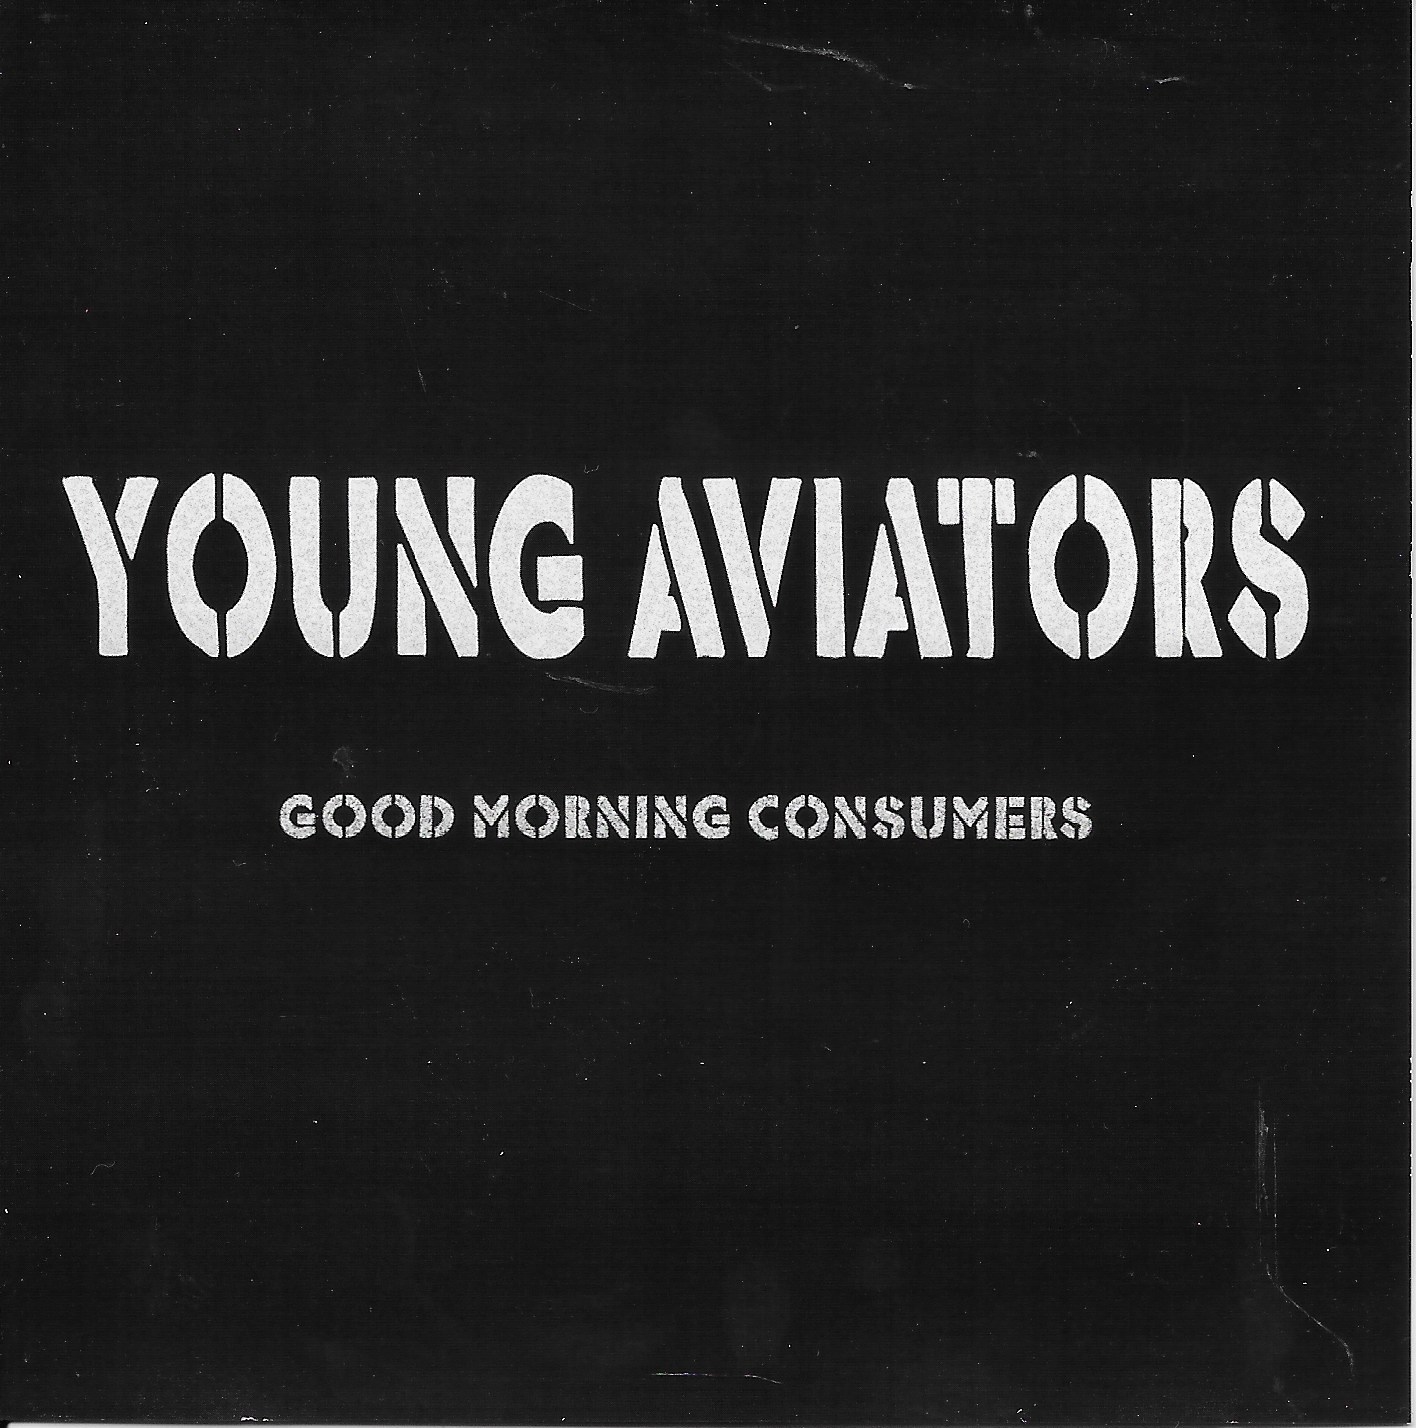 Picture of YOUNGA1--- Good morning consumers by artist Young Aviators 